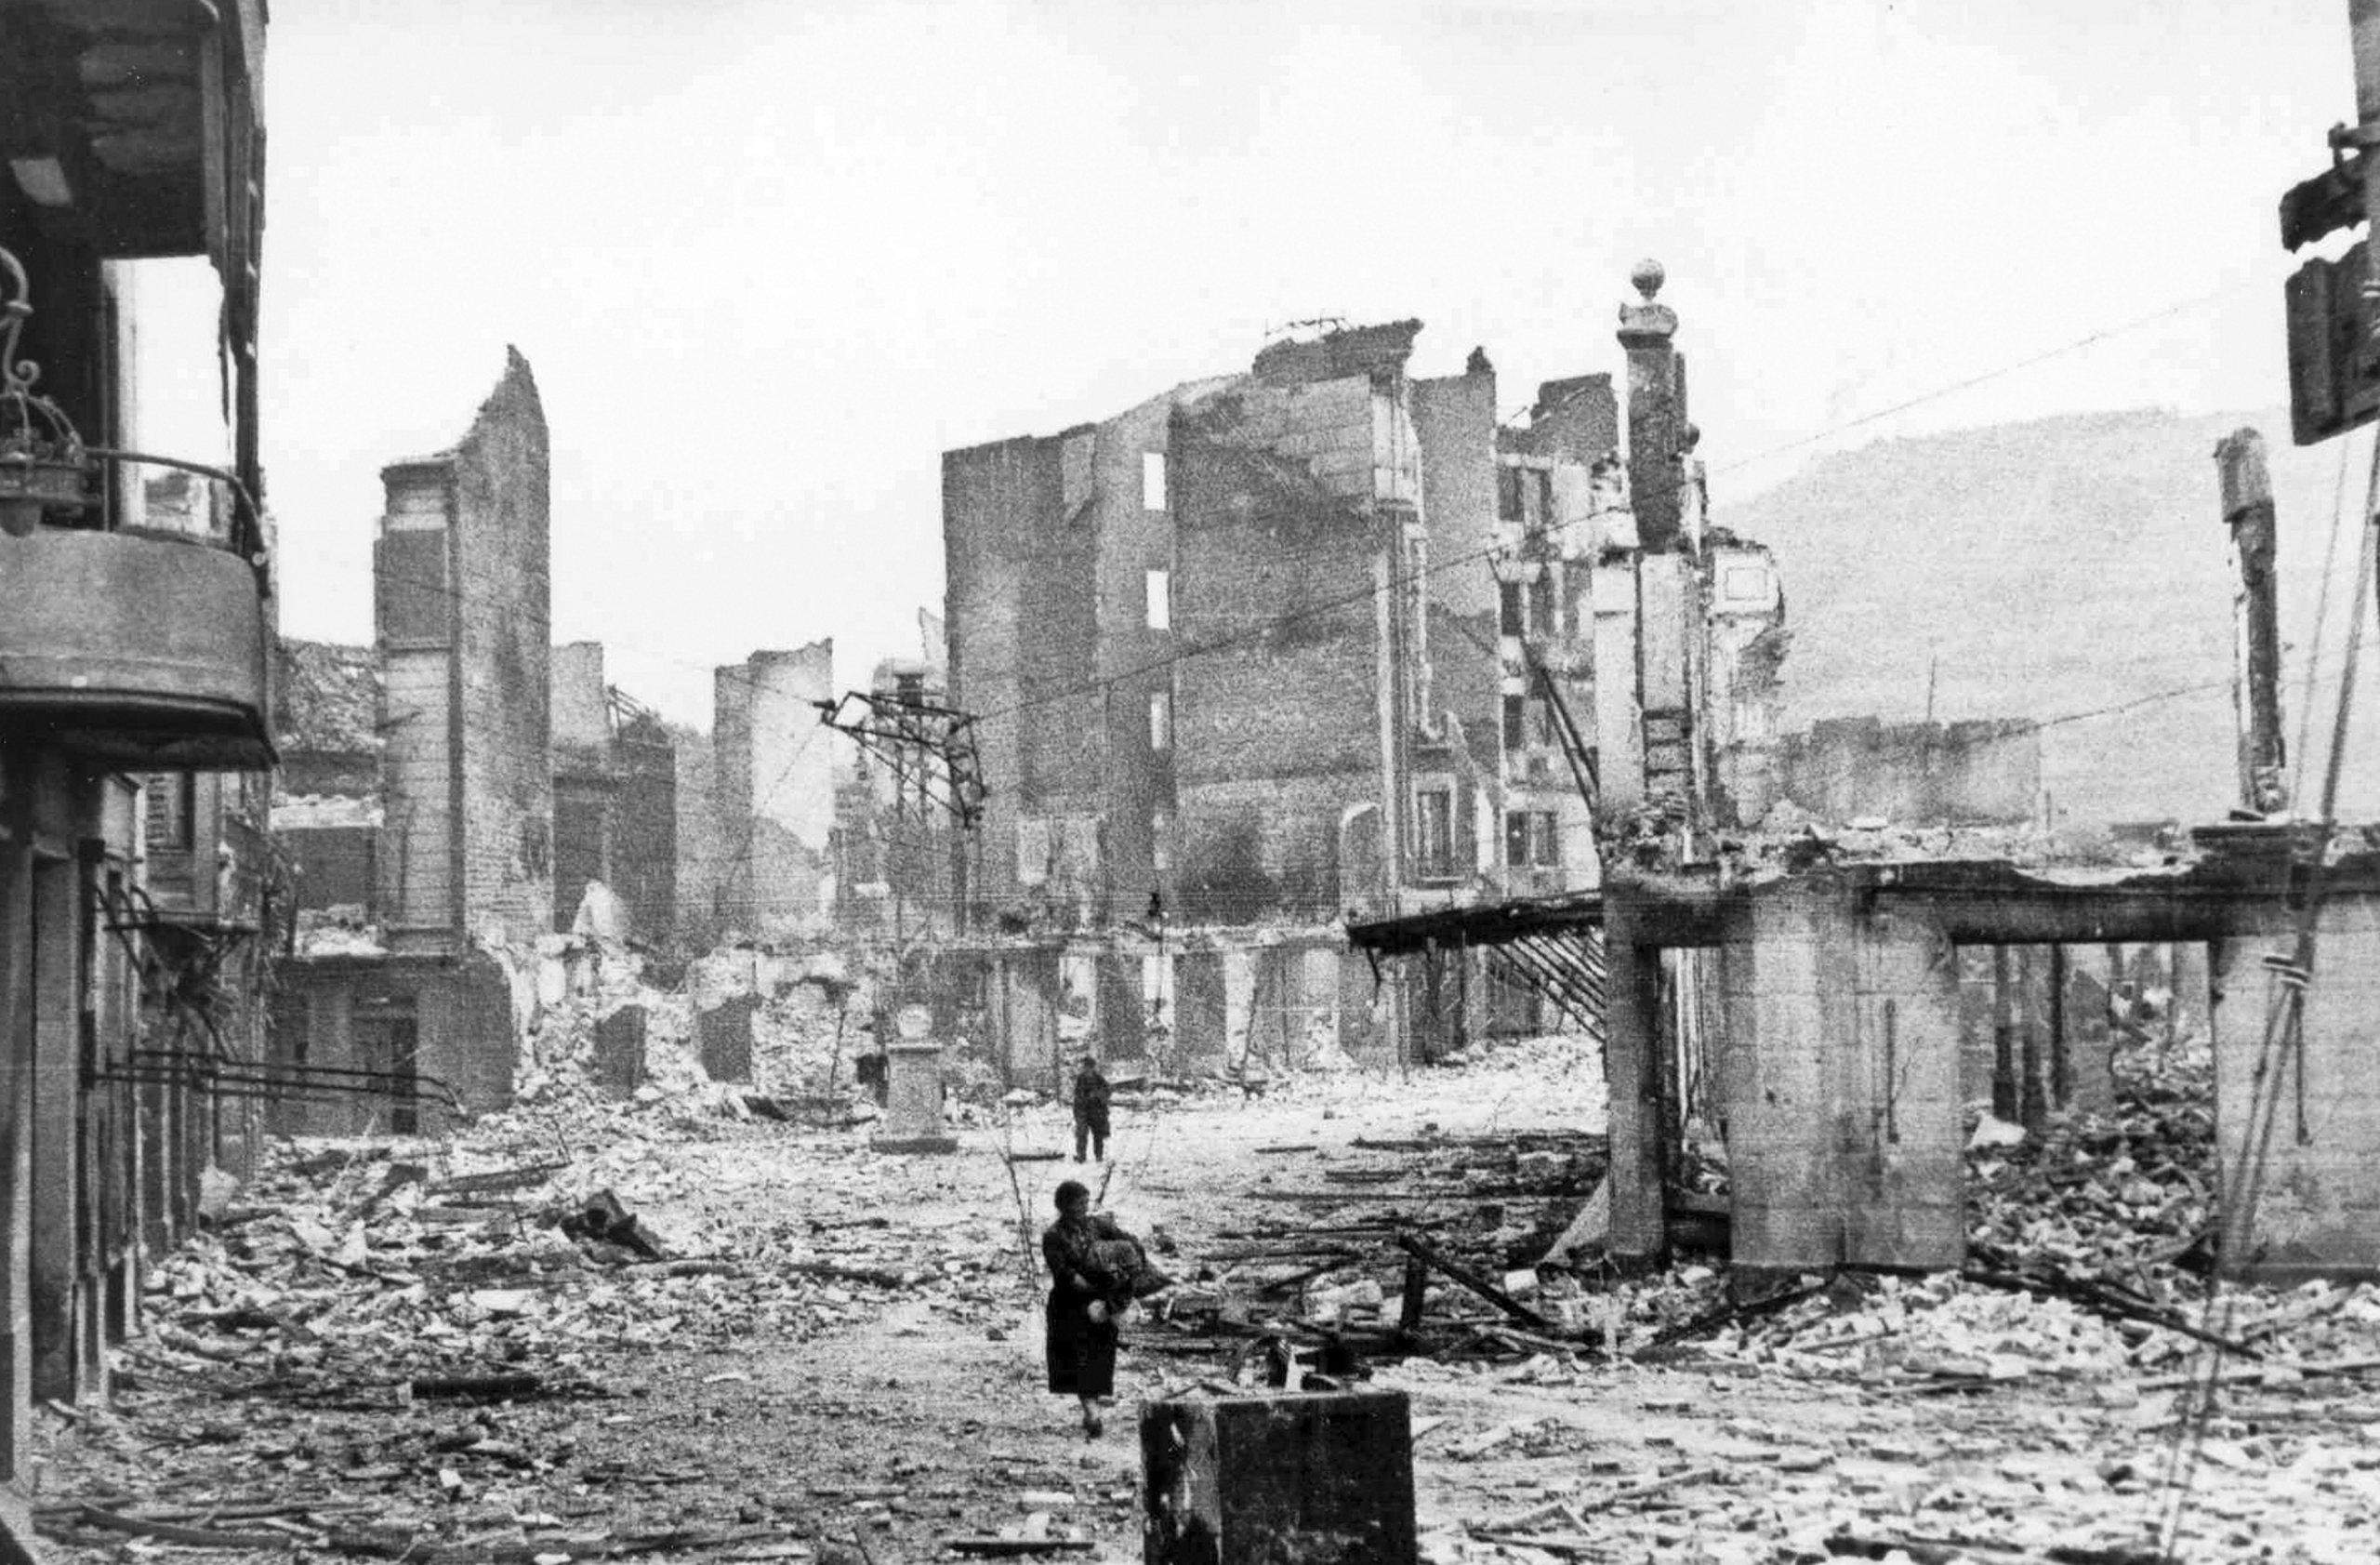 Spanish Civil War: the Spanish town of Guernica, after the bombing by German and Italian aircraft, 1937.